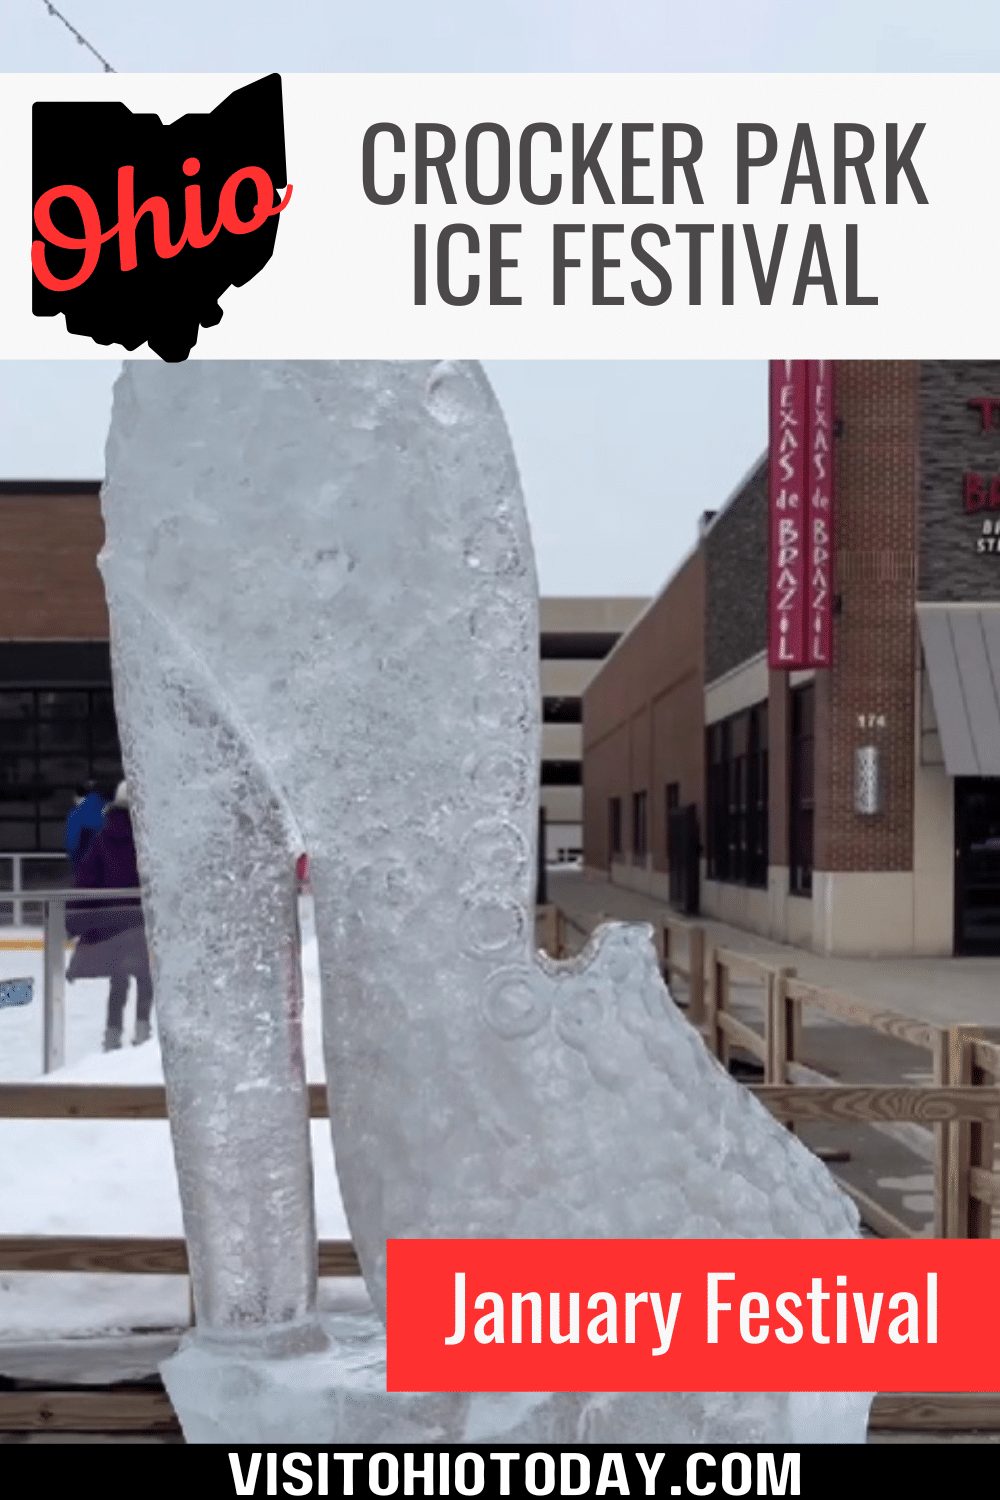 The Crocker Park Ice Festival in Westlake takes place in late January. Explore a winter wonderland while shopping, dining, and playing at Crocker Park!